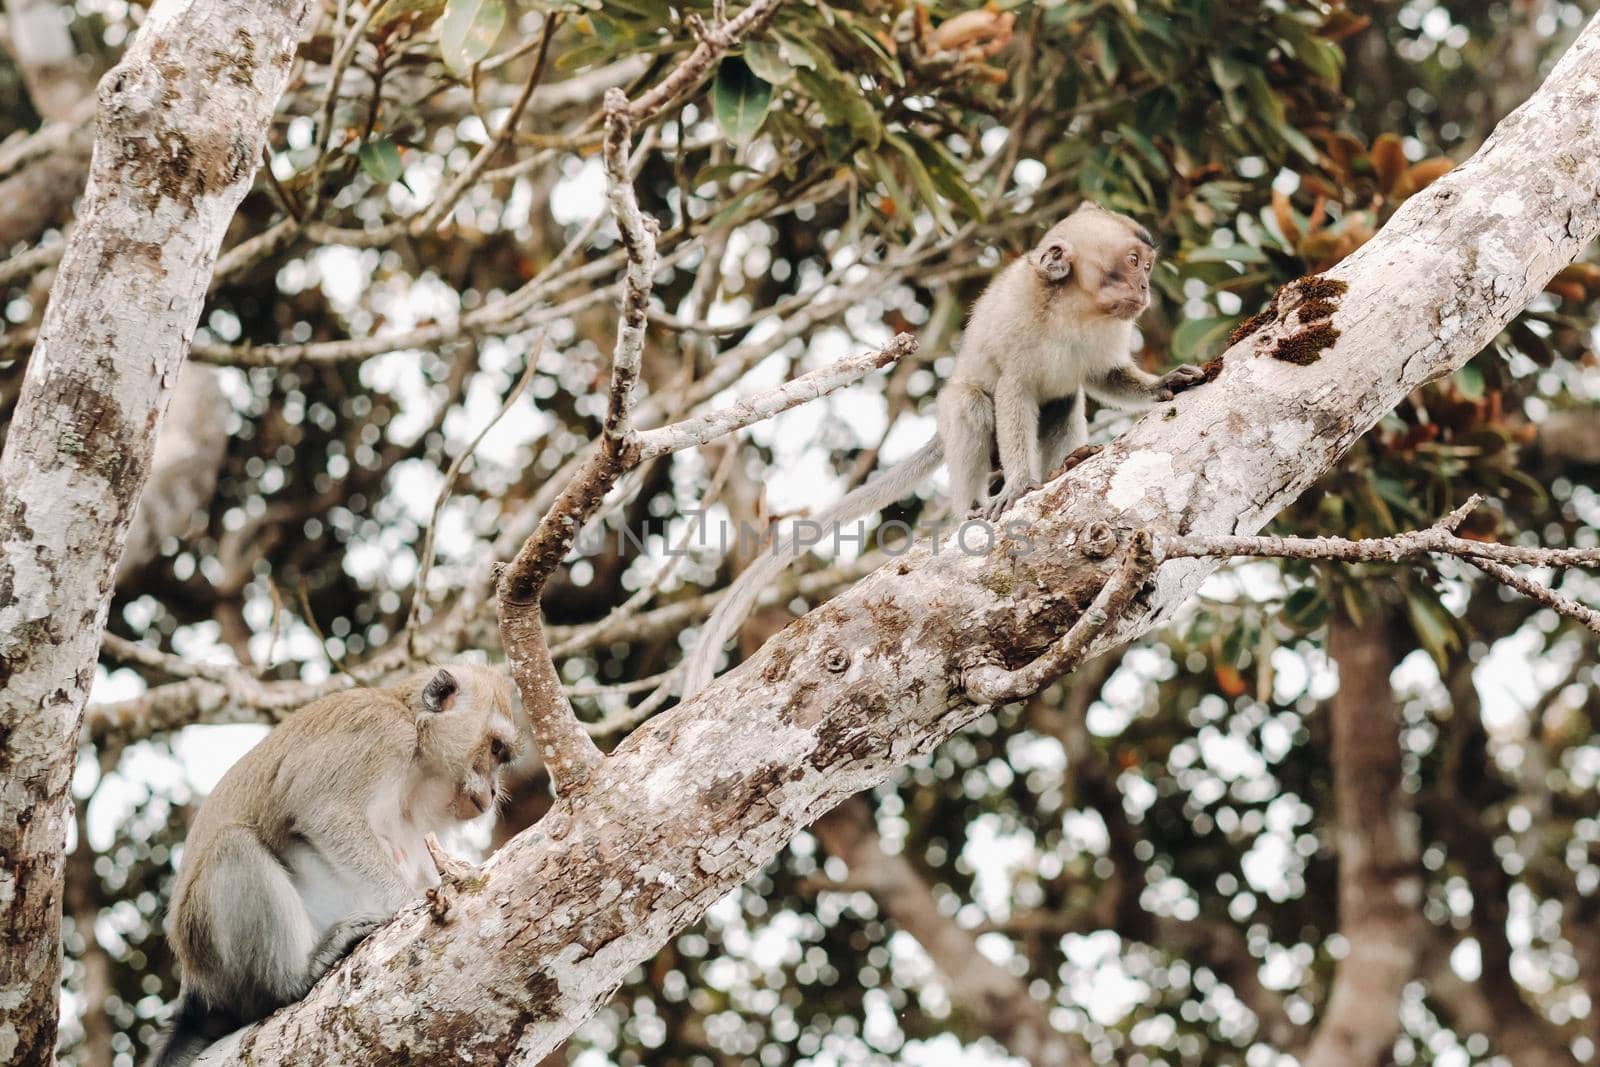 A wild live monkey sits on a tree on the island of Mauritius.Monkeys in the jungle of the island of Mauritius by Lobachad